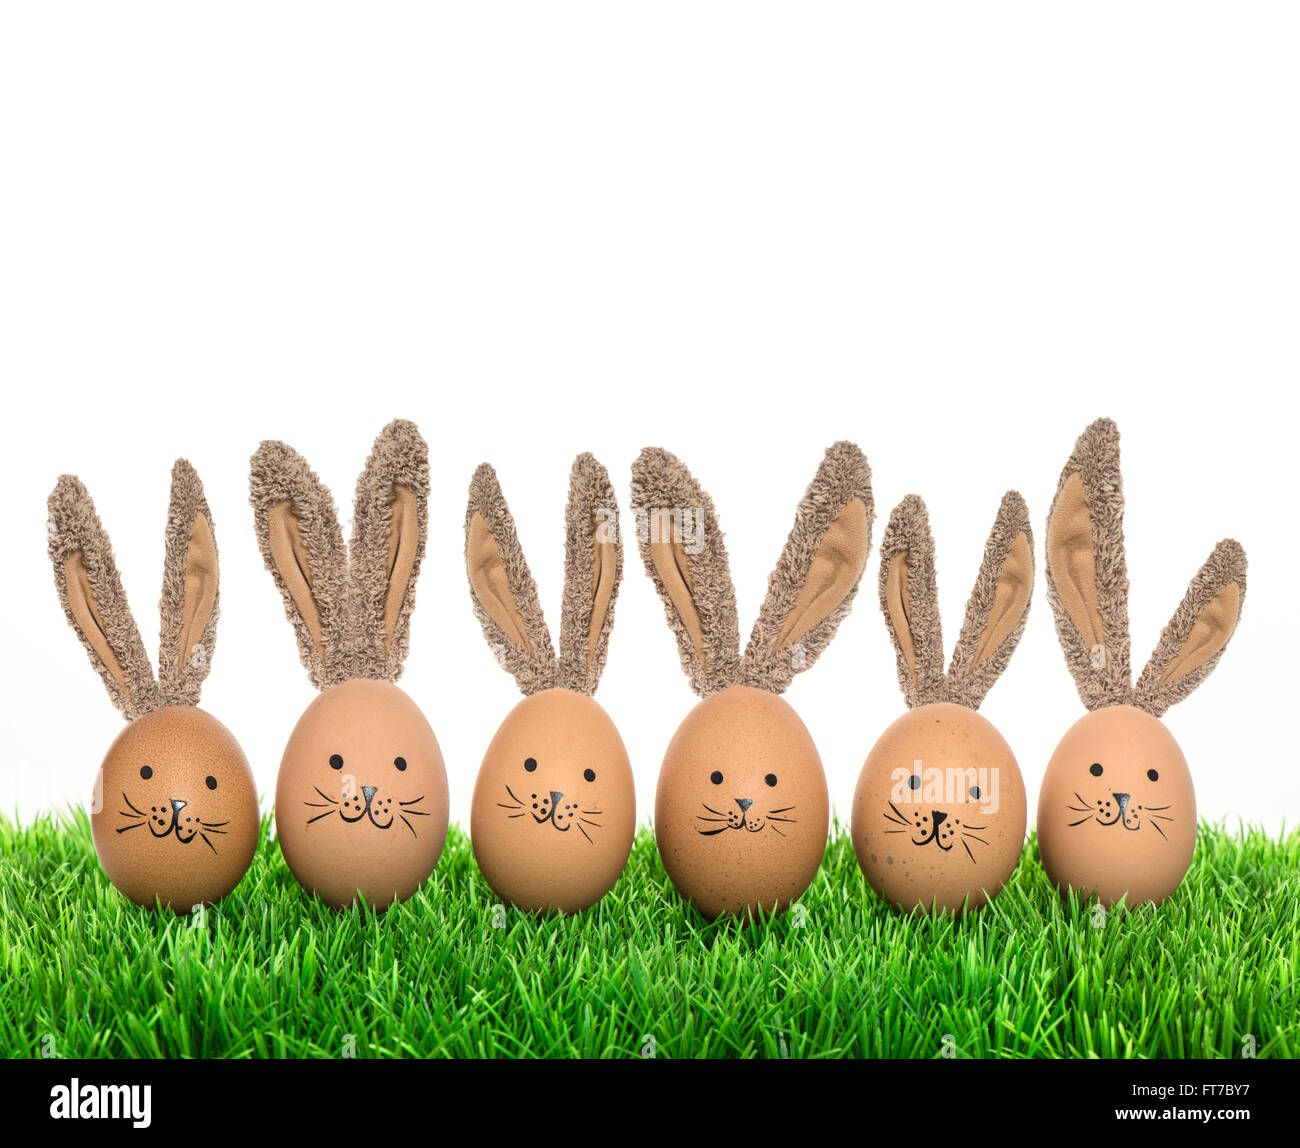 Cute smiling bunnies easter eggs with big ears. Funny holidays decoration Stock Photo